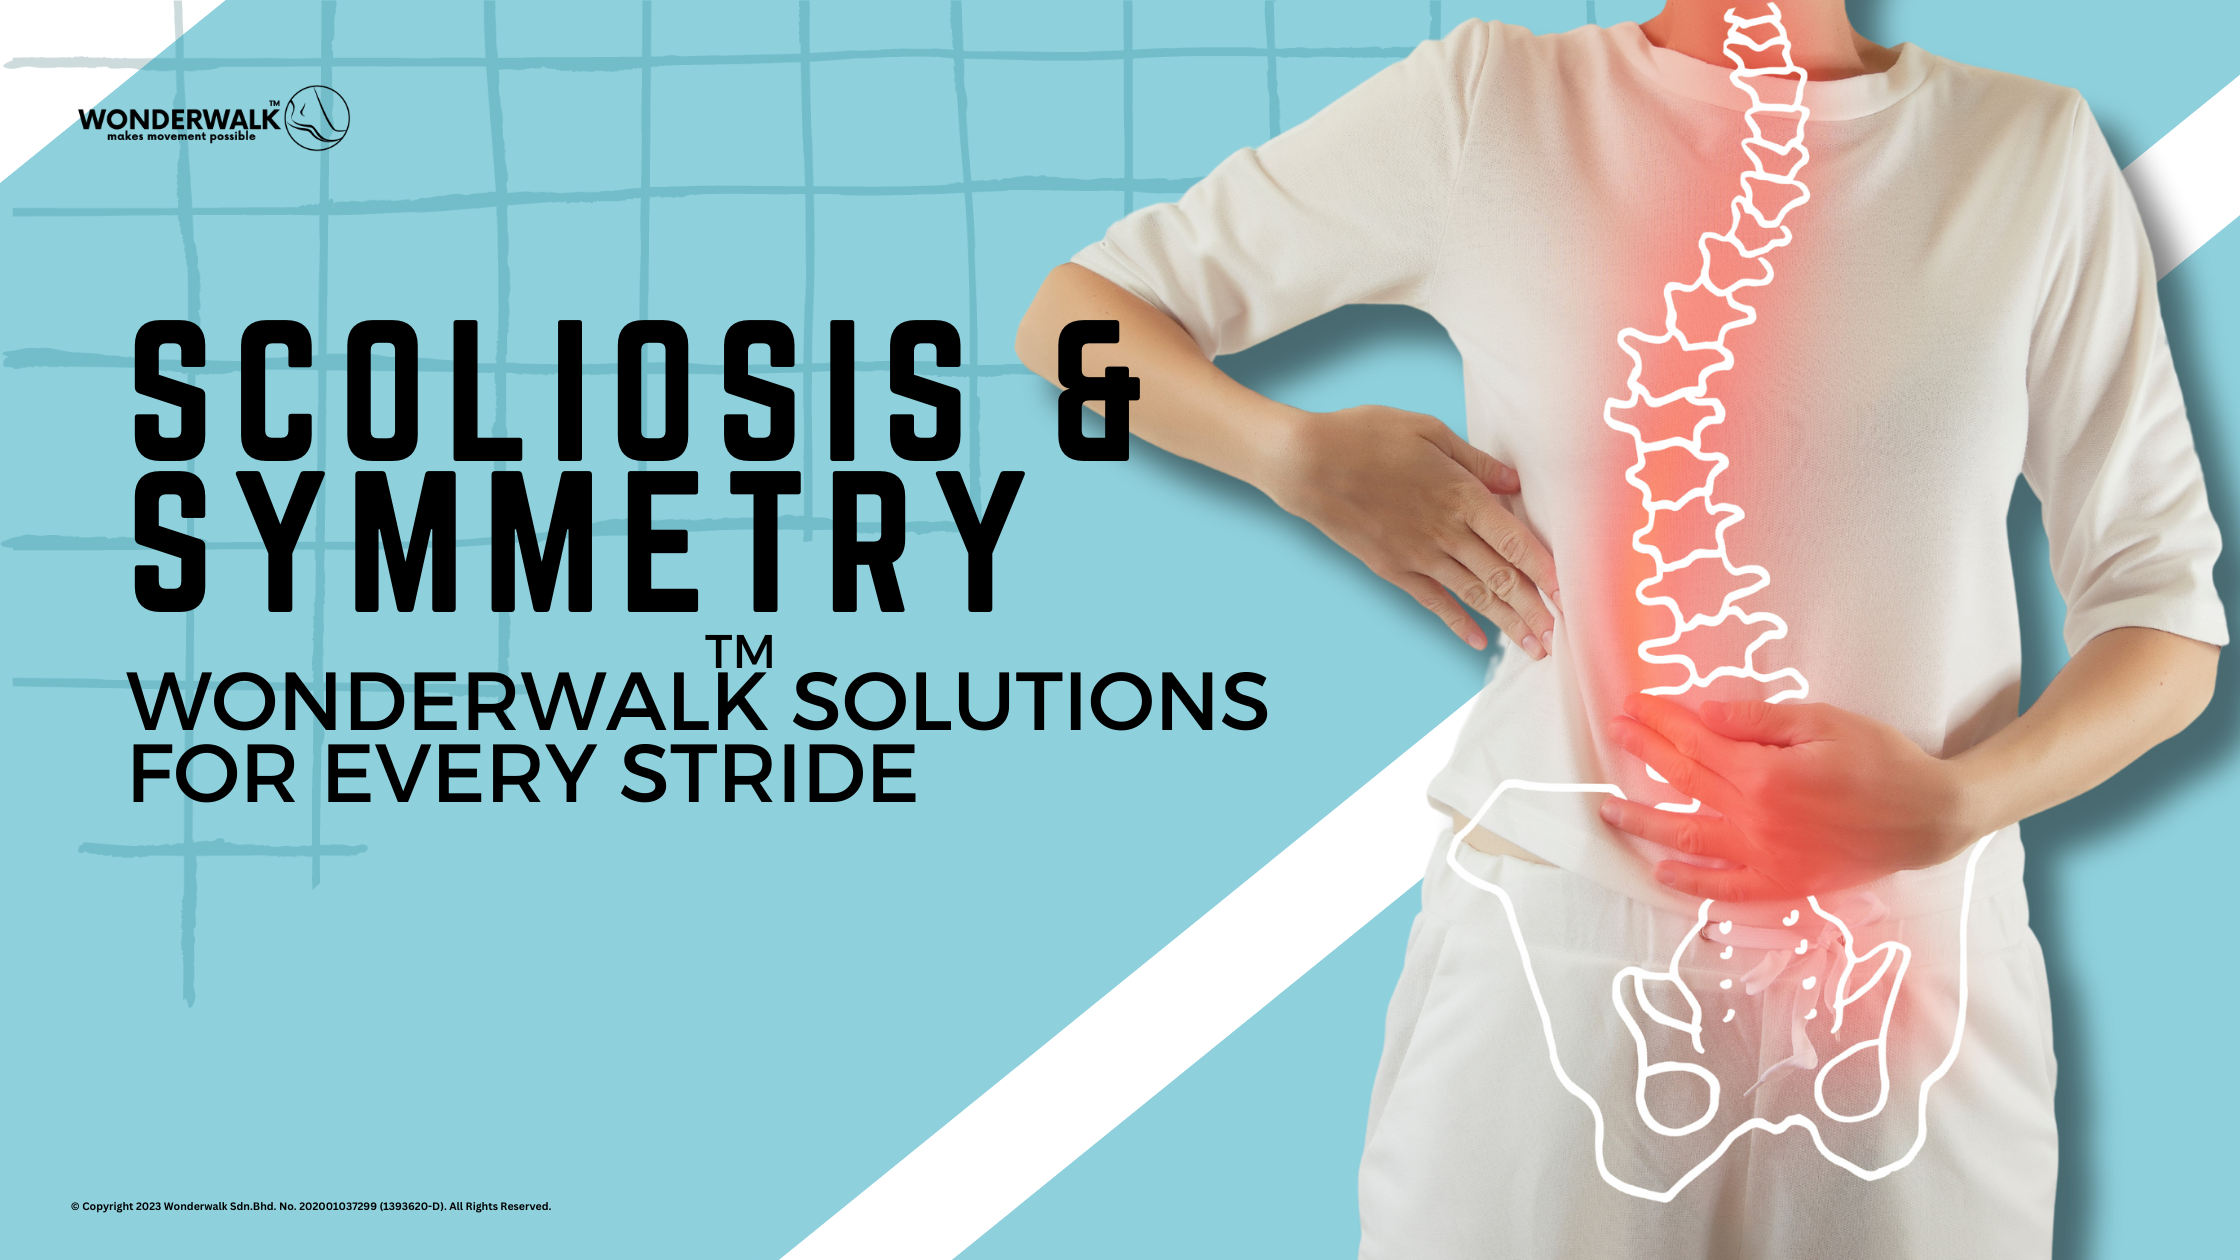 An image showcasing the impact of scoliosis on spine alignment, with visual emphasis on the lumbar region to represent the benefits of Wonderwalk Bespoke Insoles for posture correction and stride improvement.